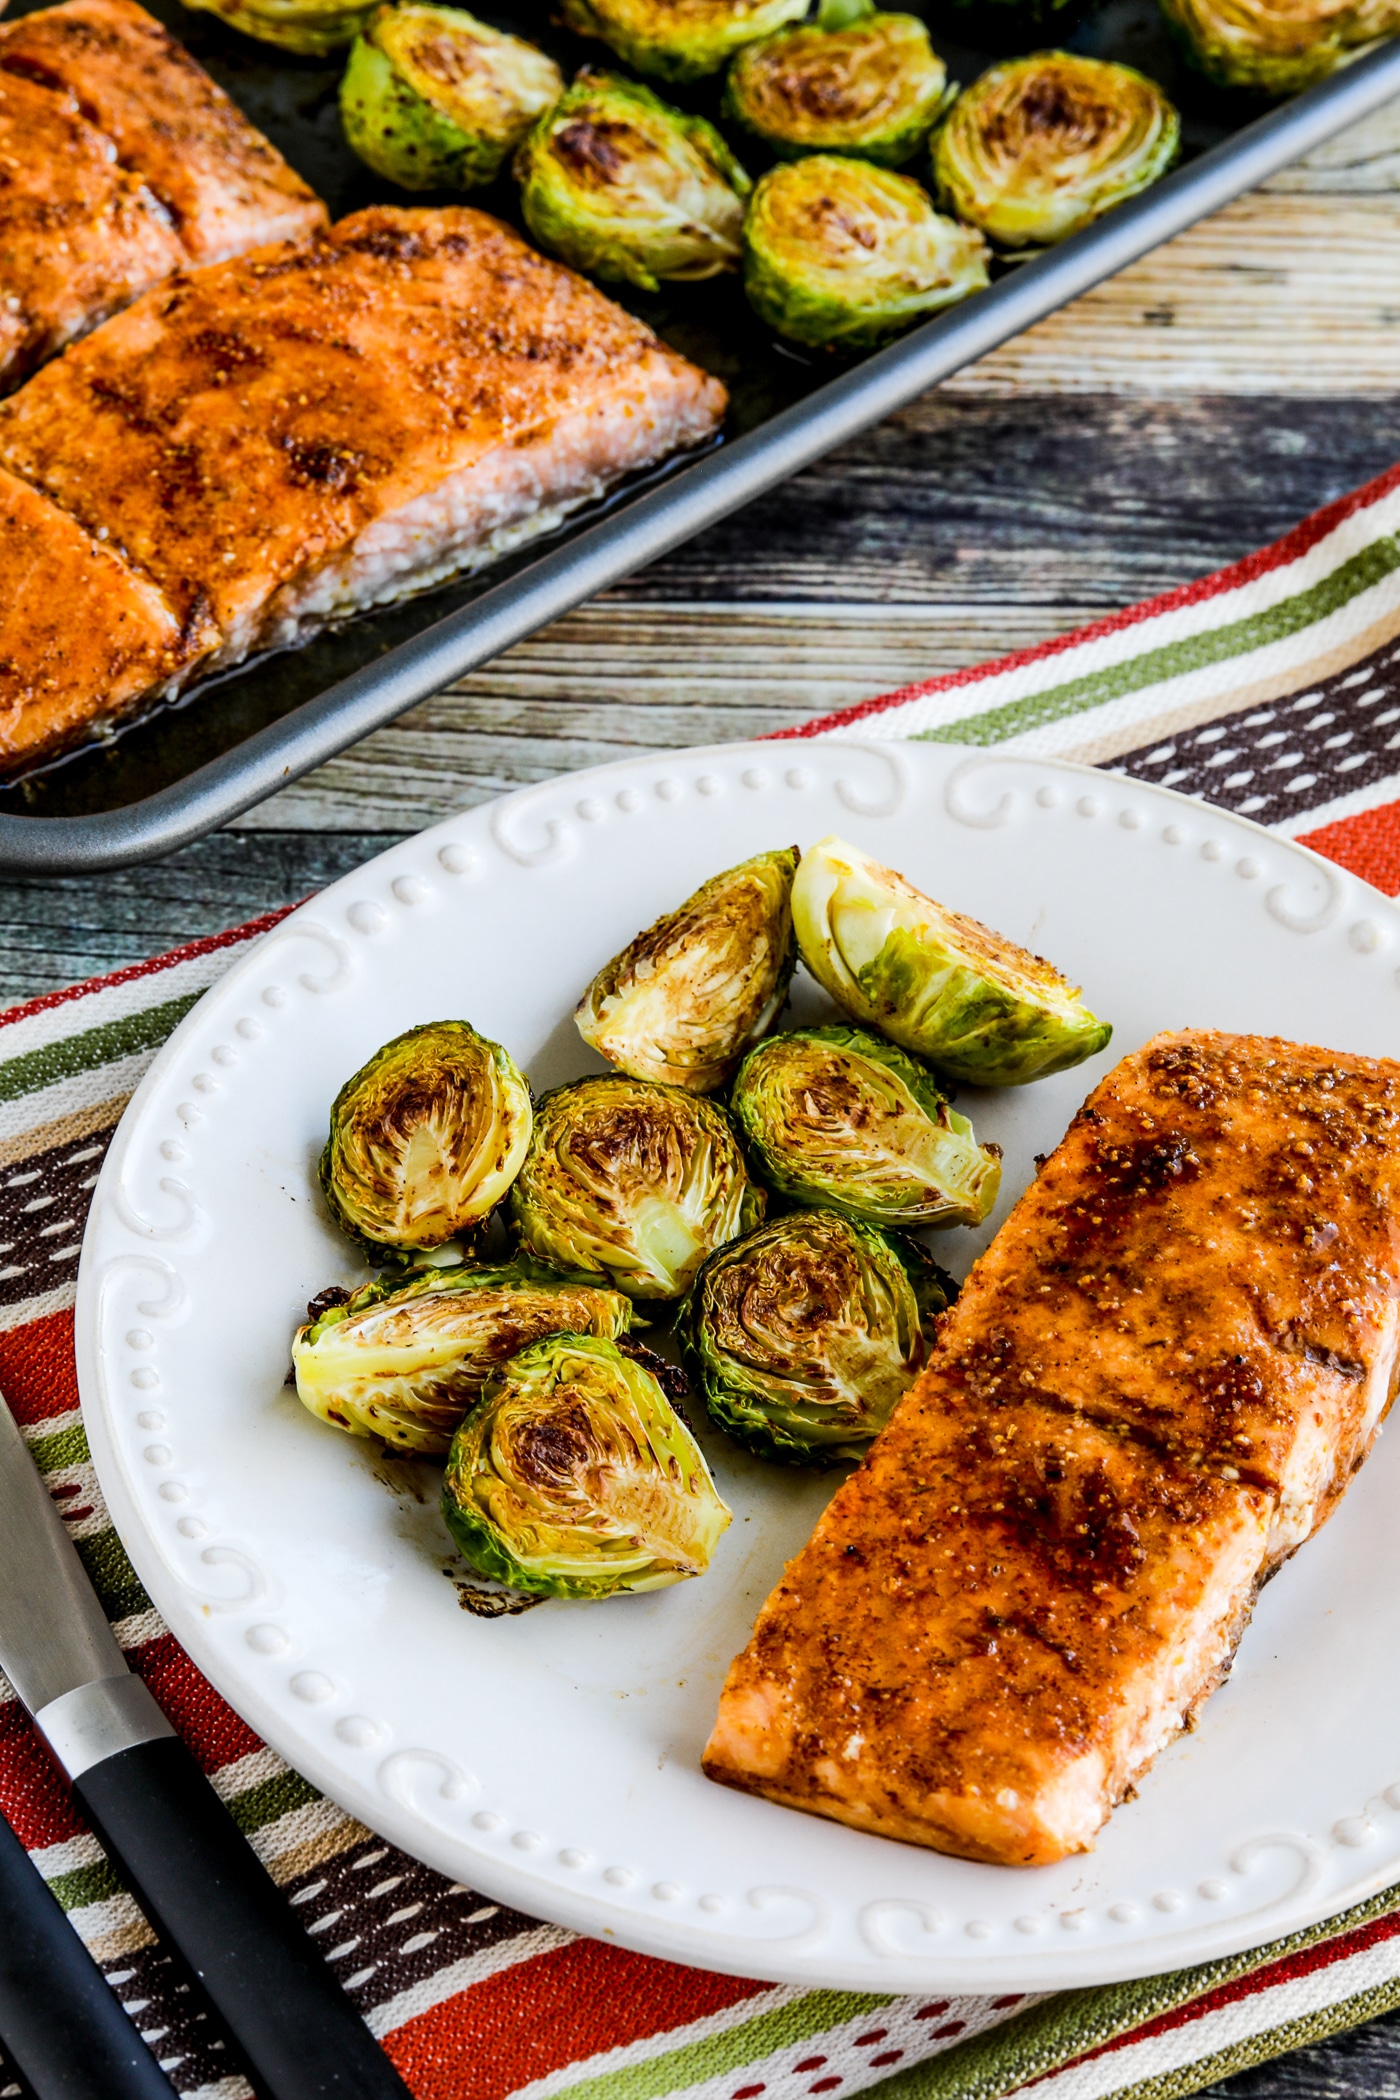 Roasted Brussels Sprouts and Salmon Sheet Pan Meal finished meal with one serving on plate